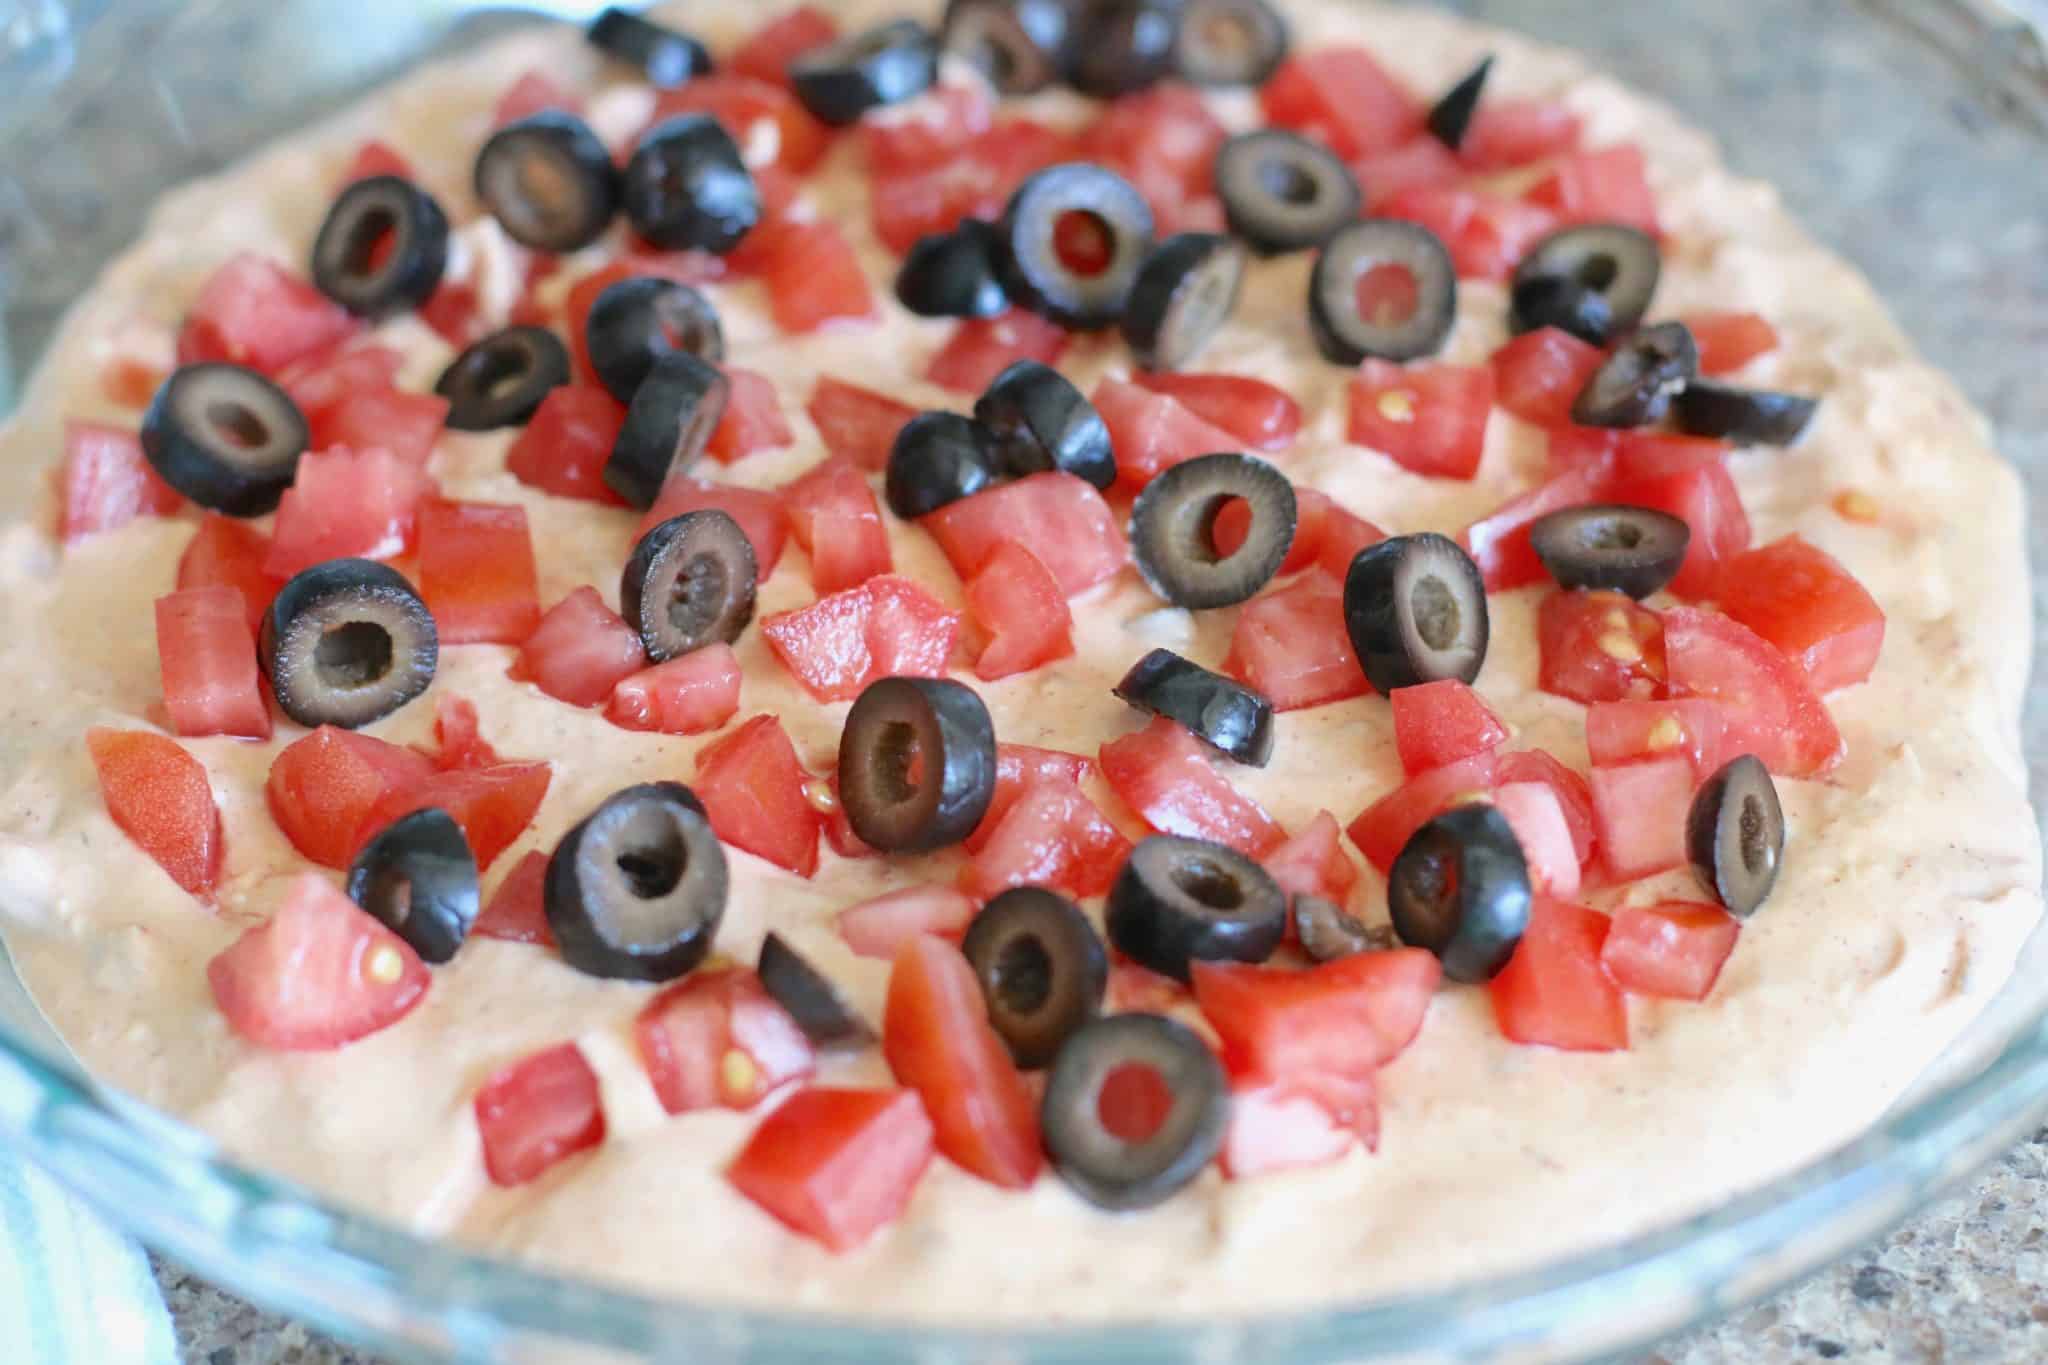 sliced olives and tomatoes added to dip mixture.